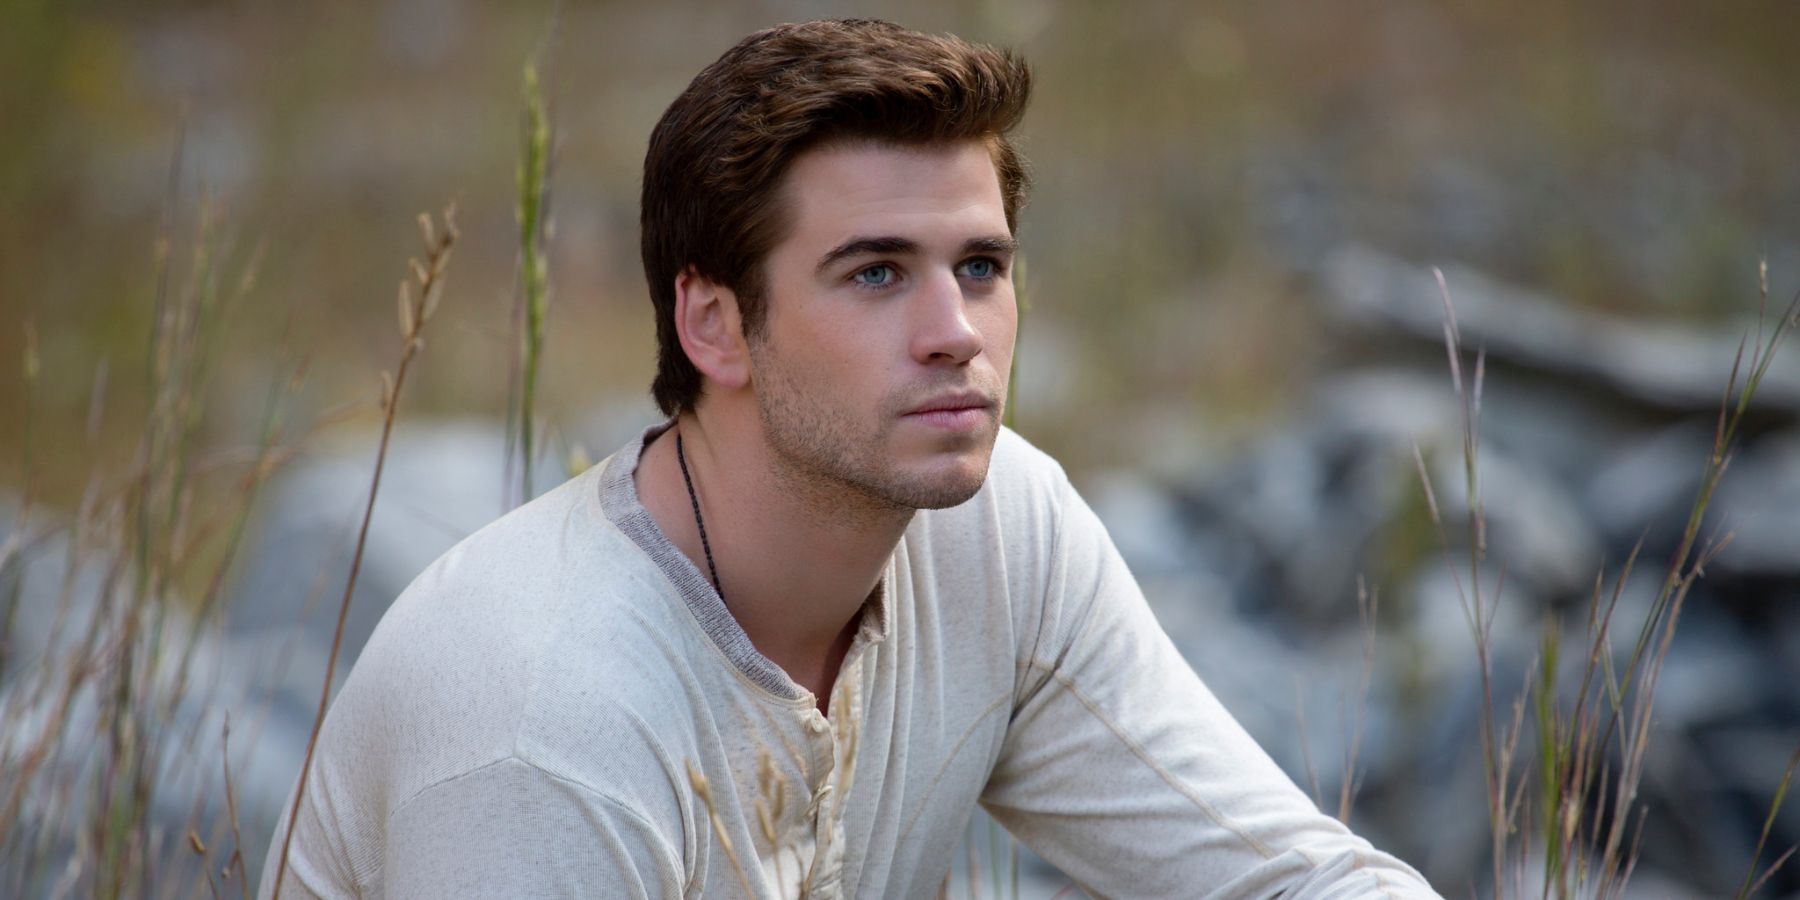 Gale looking serious in The Hunger Games